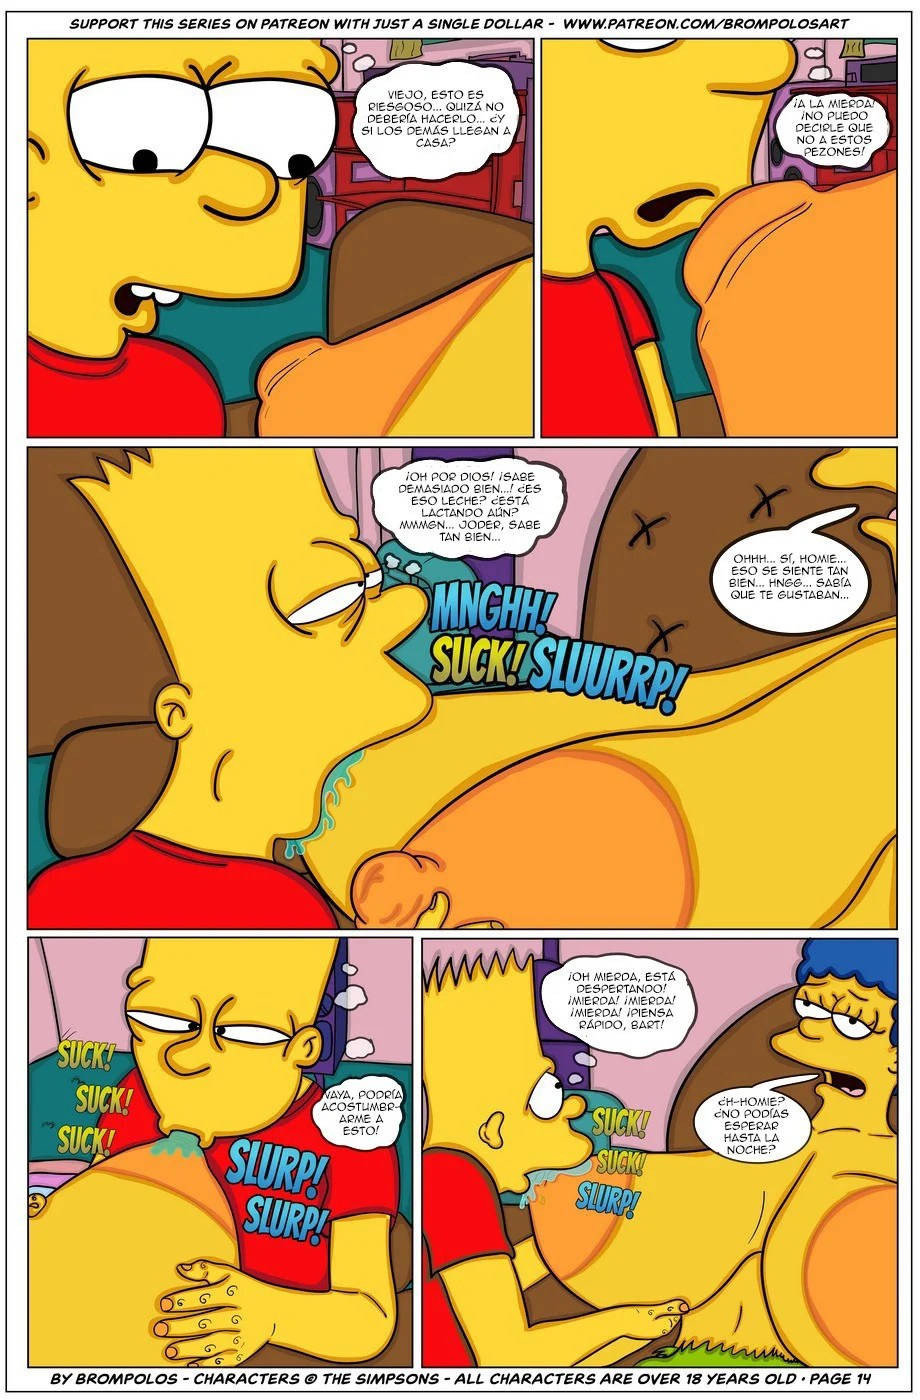 The Simpsons are The Sexenteins - 0781c4888bf6713773d262f3dd94e91c